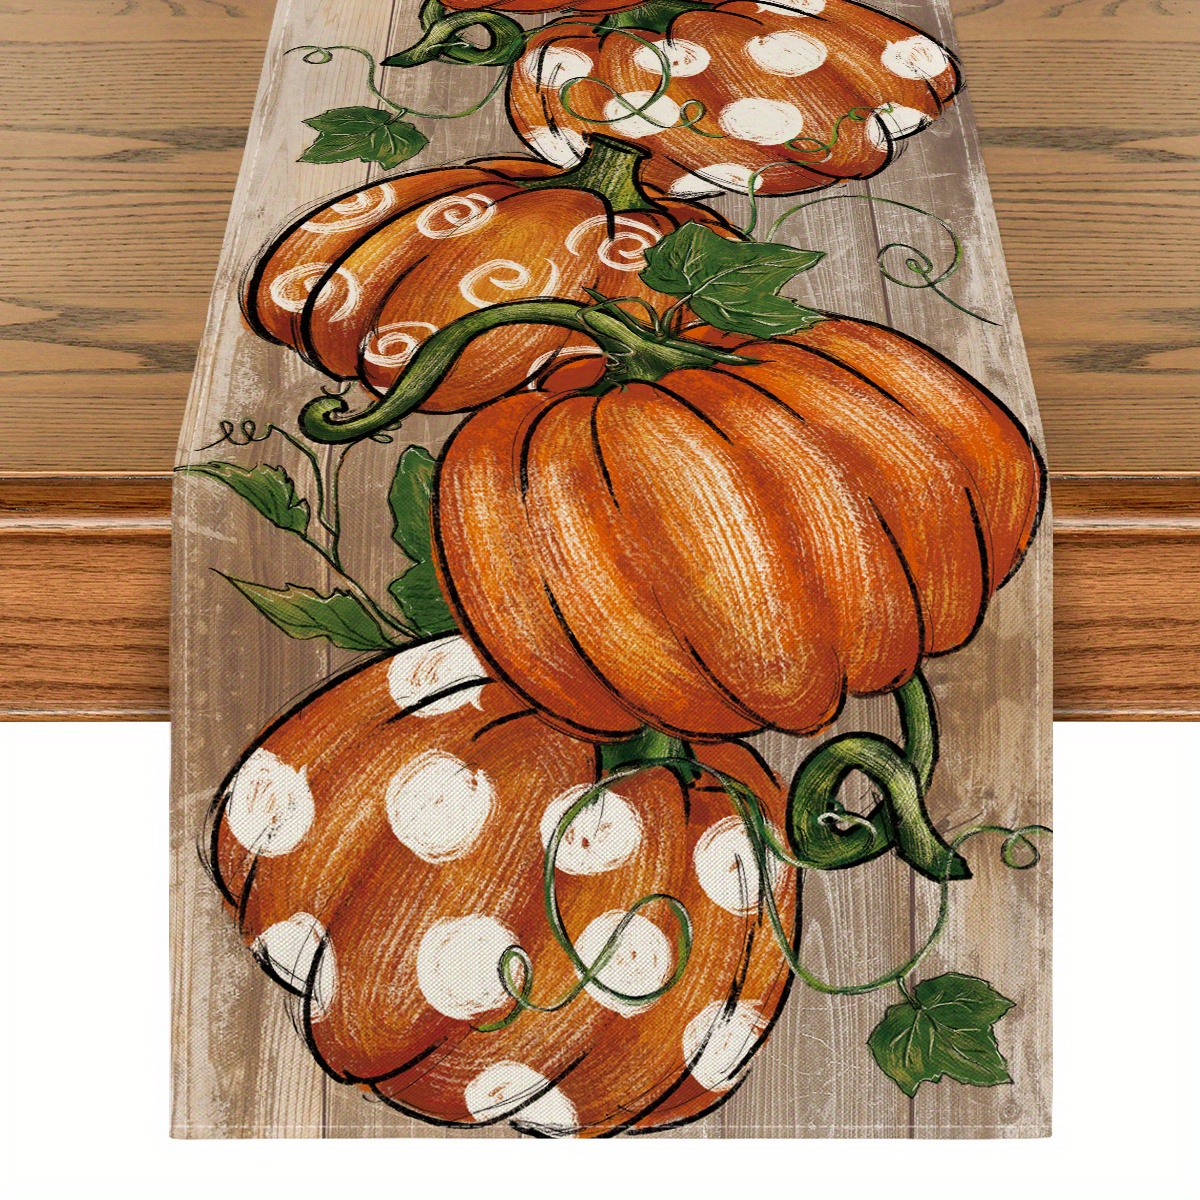 

Sm:)e Polka Dot Pumpkins Vine Fall 1pc Table Runner 13x72 Inch And 4pc Place Mats 12x18 Inch, Seasonal Autumn Thanksgiving Kitchen Dining Table Funky Home Decor For Home Party Funky Home Decoration